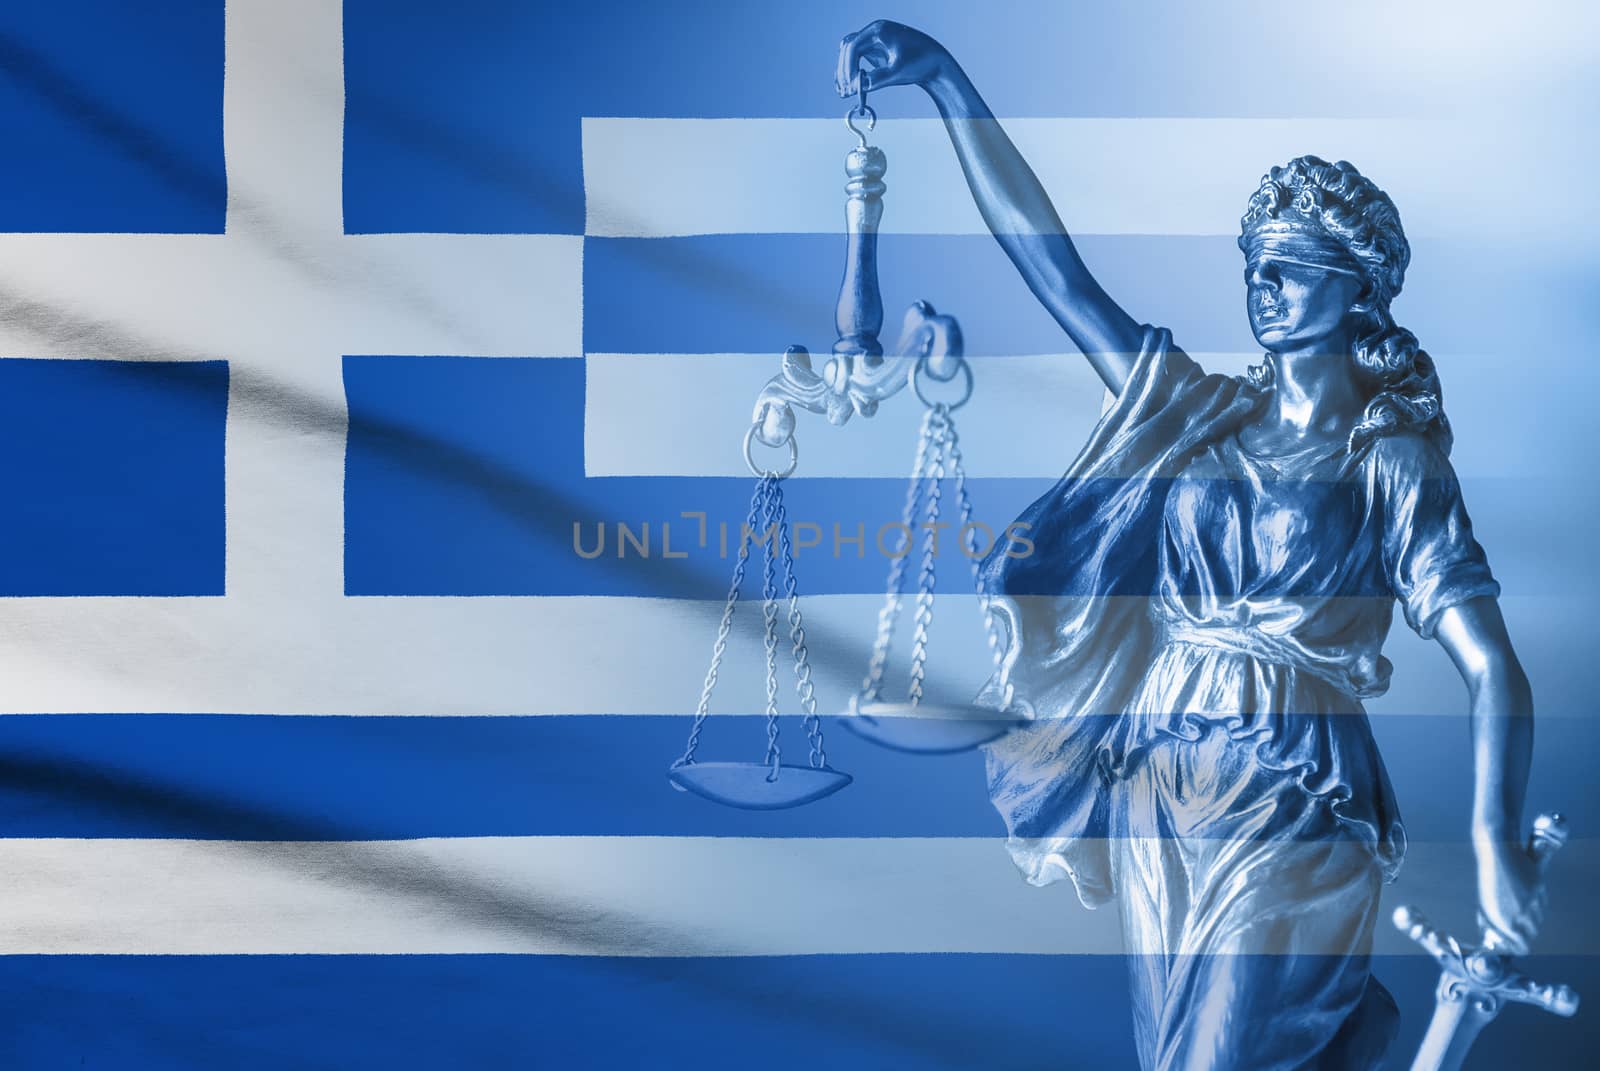 Greek flag and figure of Justice in a full frame background conceptual of law and order and impartiality